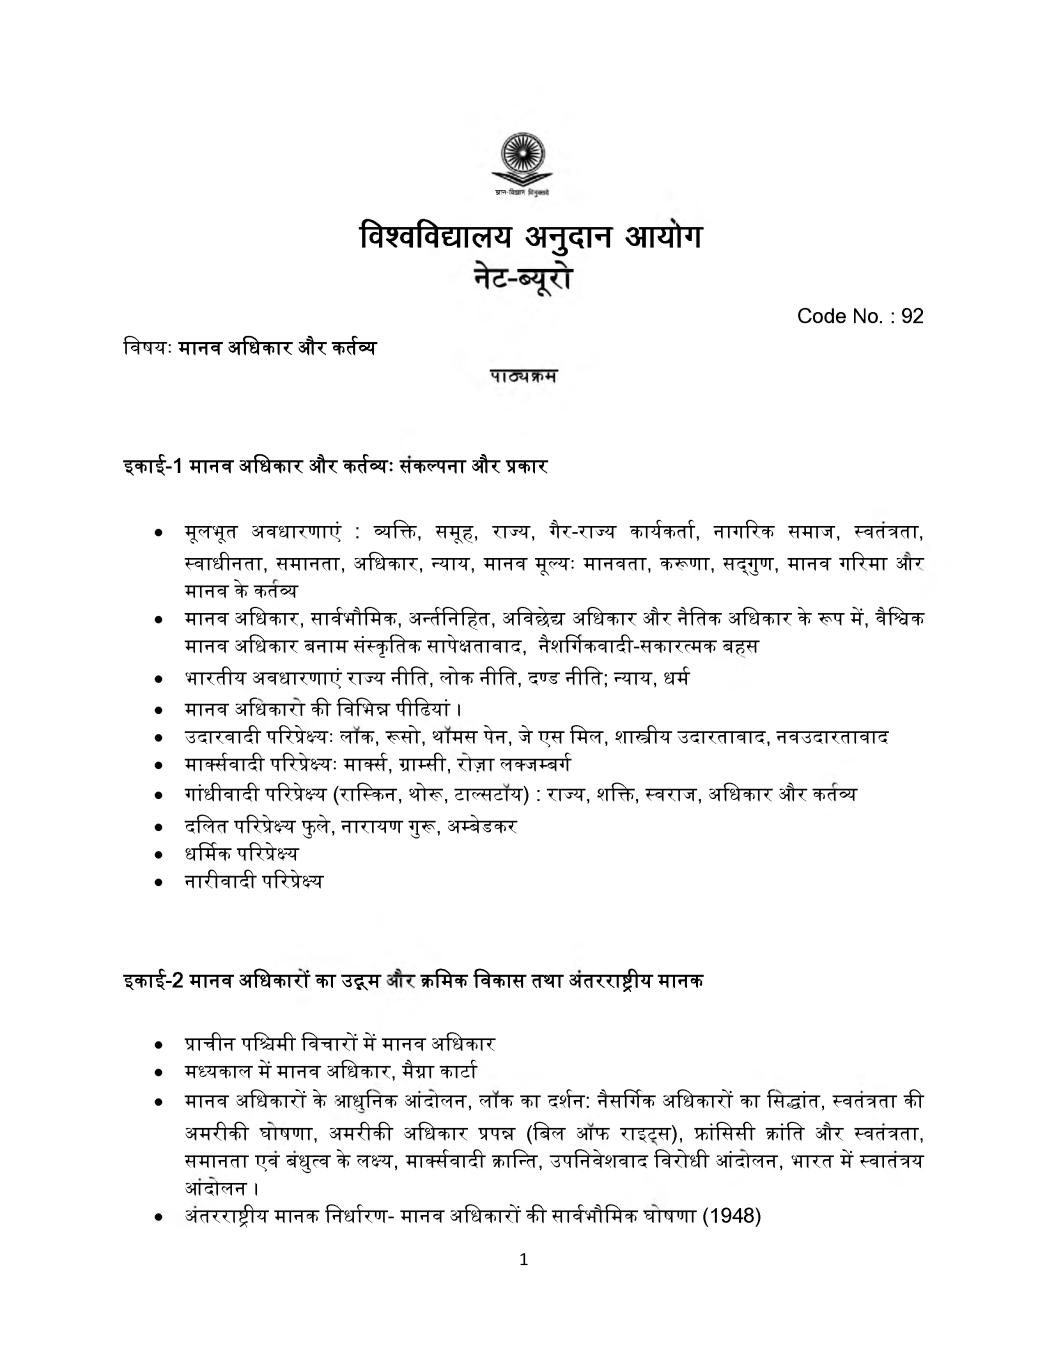 UGC NET Syllabus for Human Rights and Duties 2020 in Hindi - Page 1